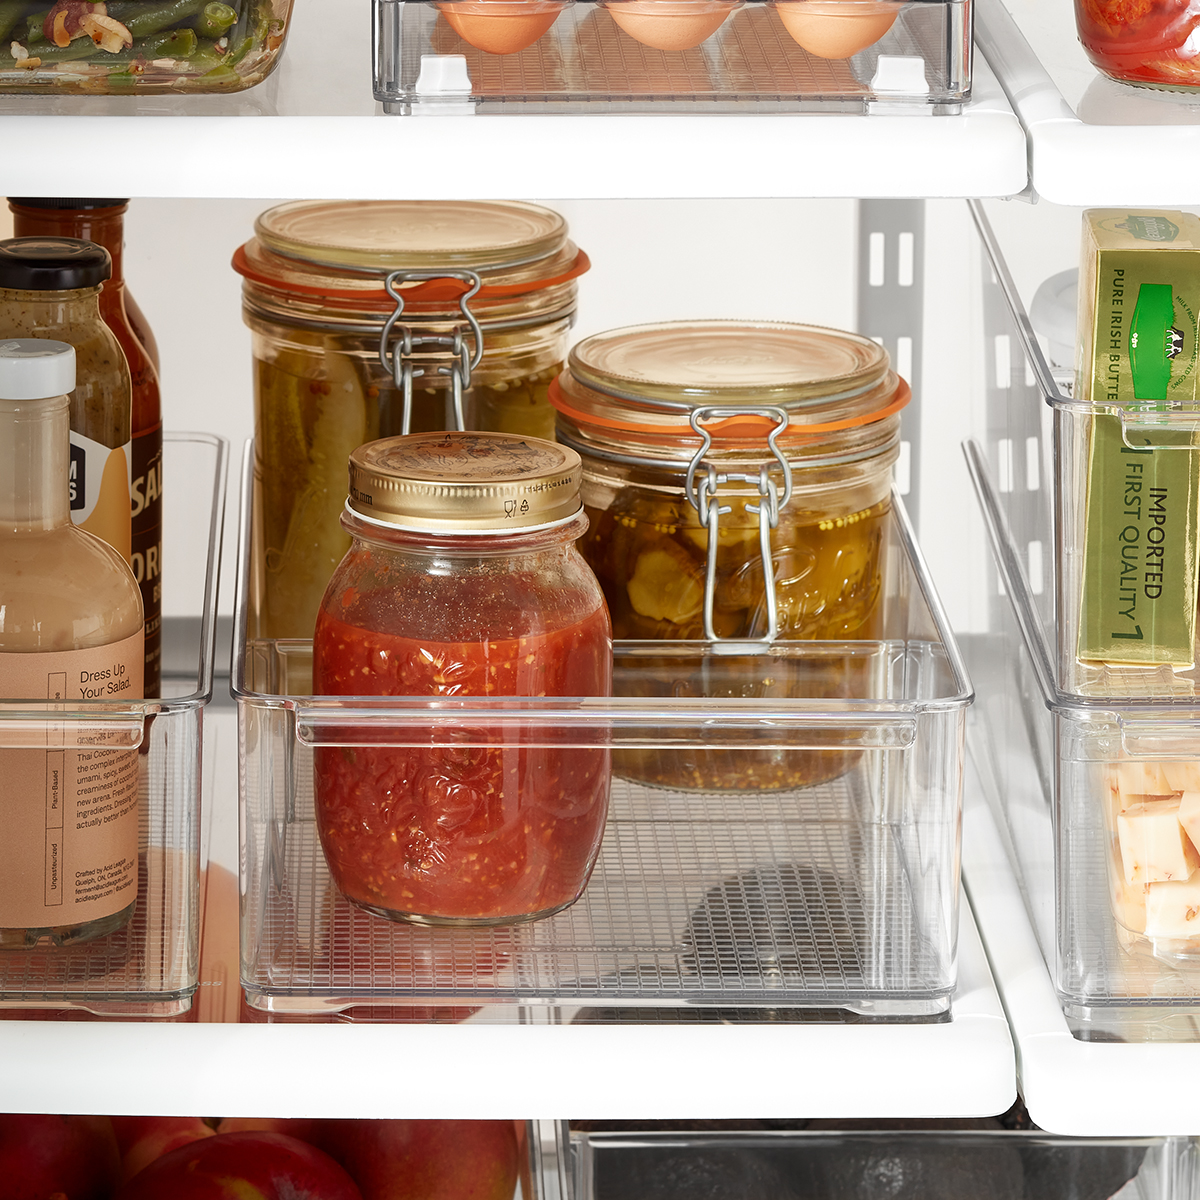 https://www.containerstore.com/catalogimages/455675/10090089-tcs-wide-divided-fridge-bin.jpg